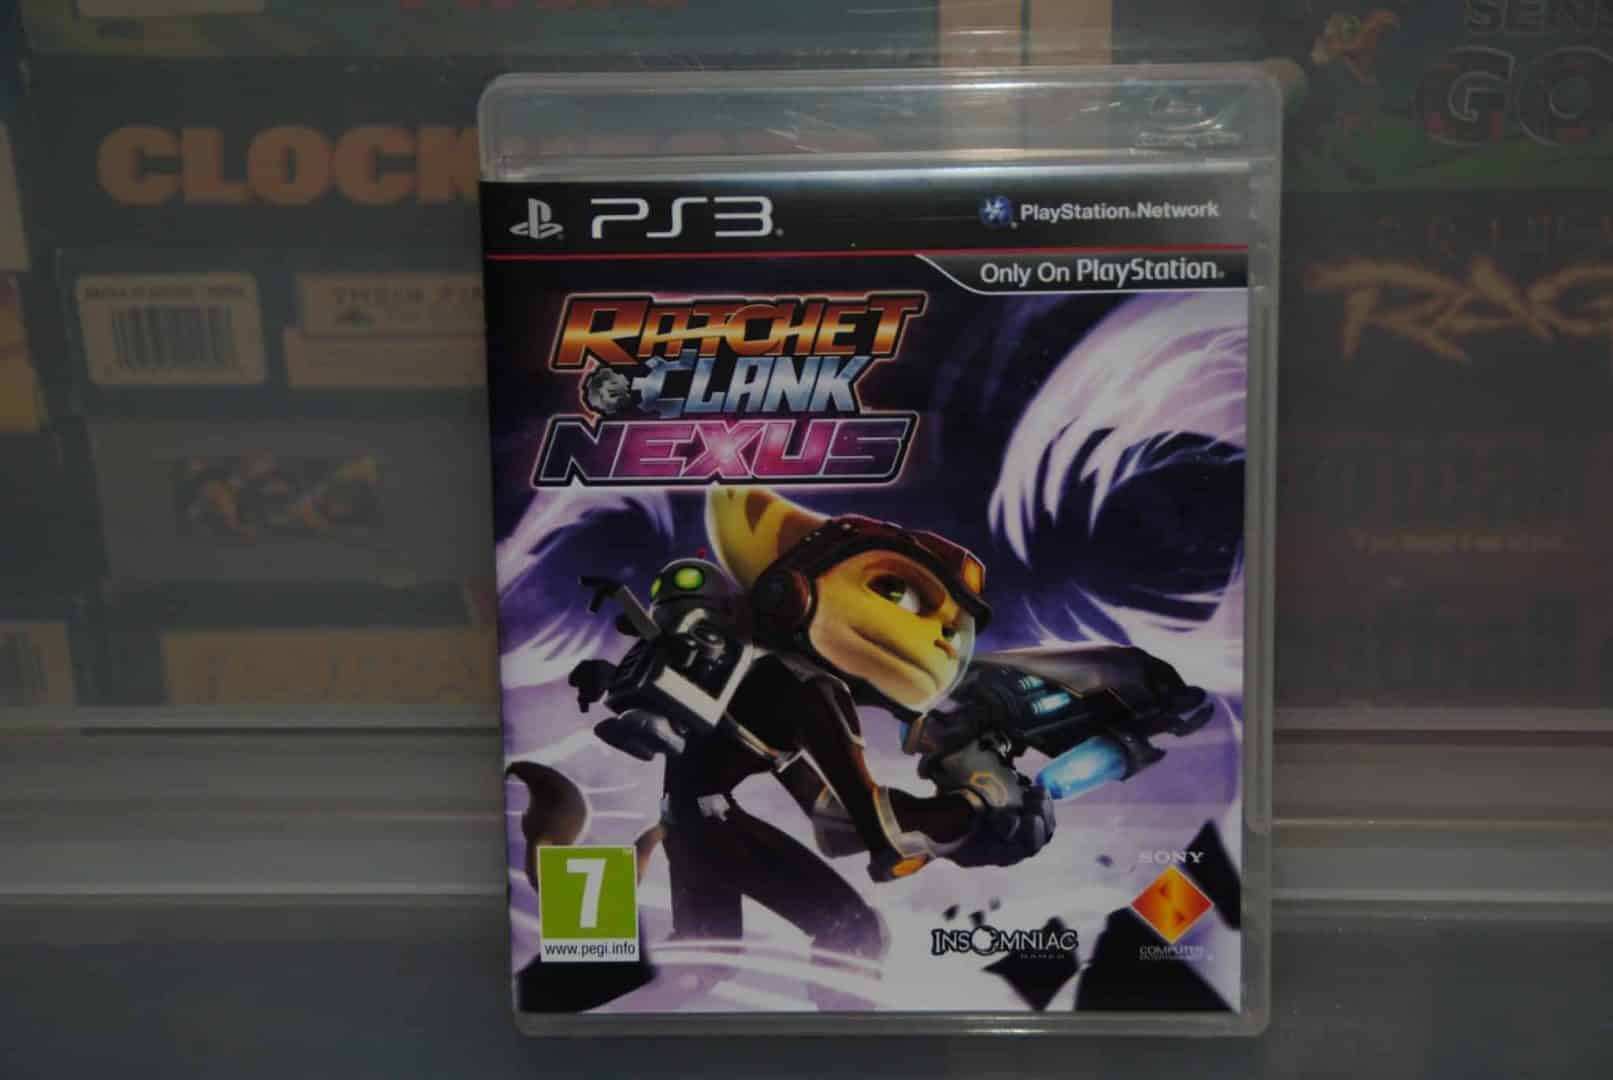 Ratchet & Clank Nexus, the return of Clank as we know it.